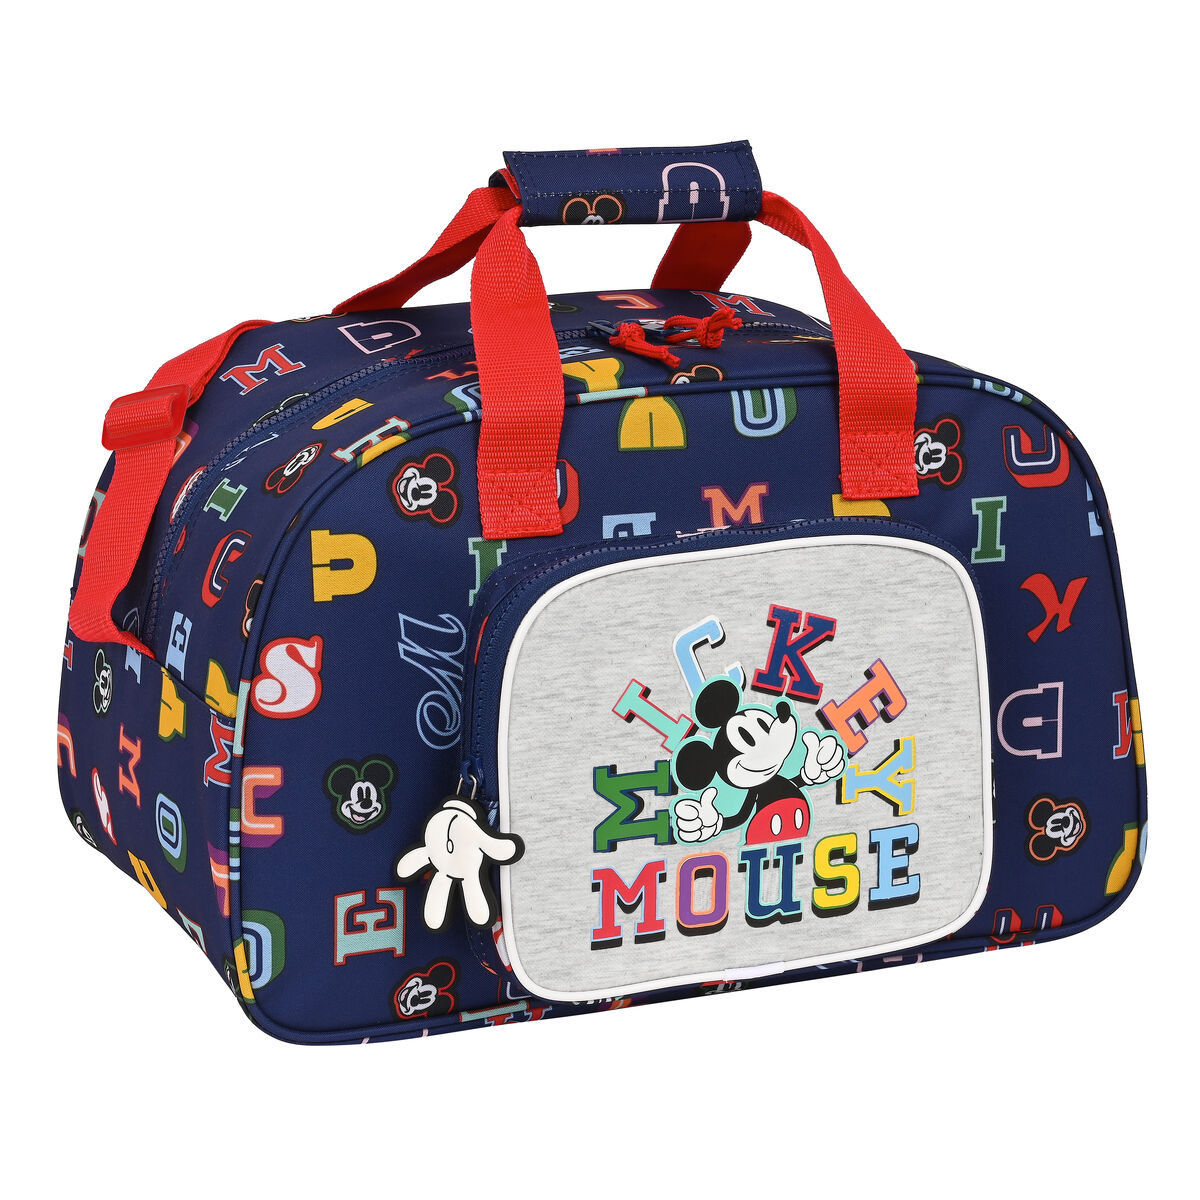 Geantă de Sport Mickey Mouse Clubhouse Only one Bleumarin (40 x 24 x 23 cm)